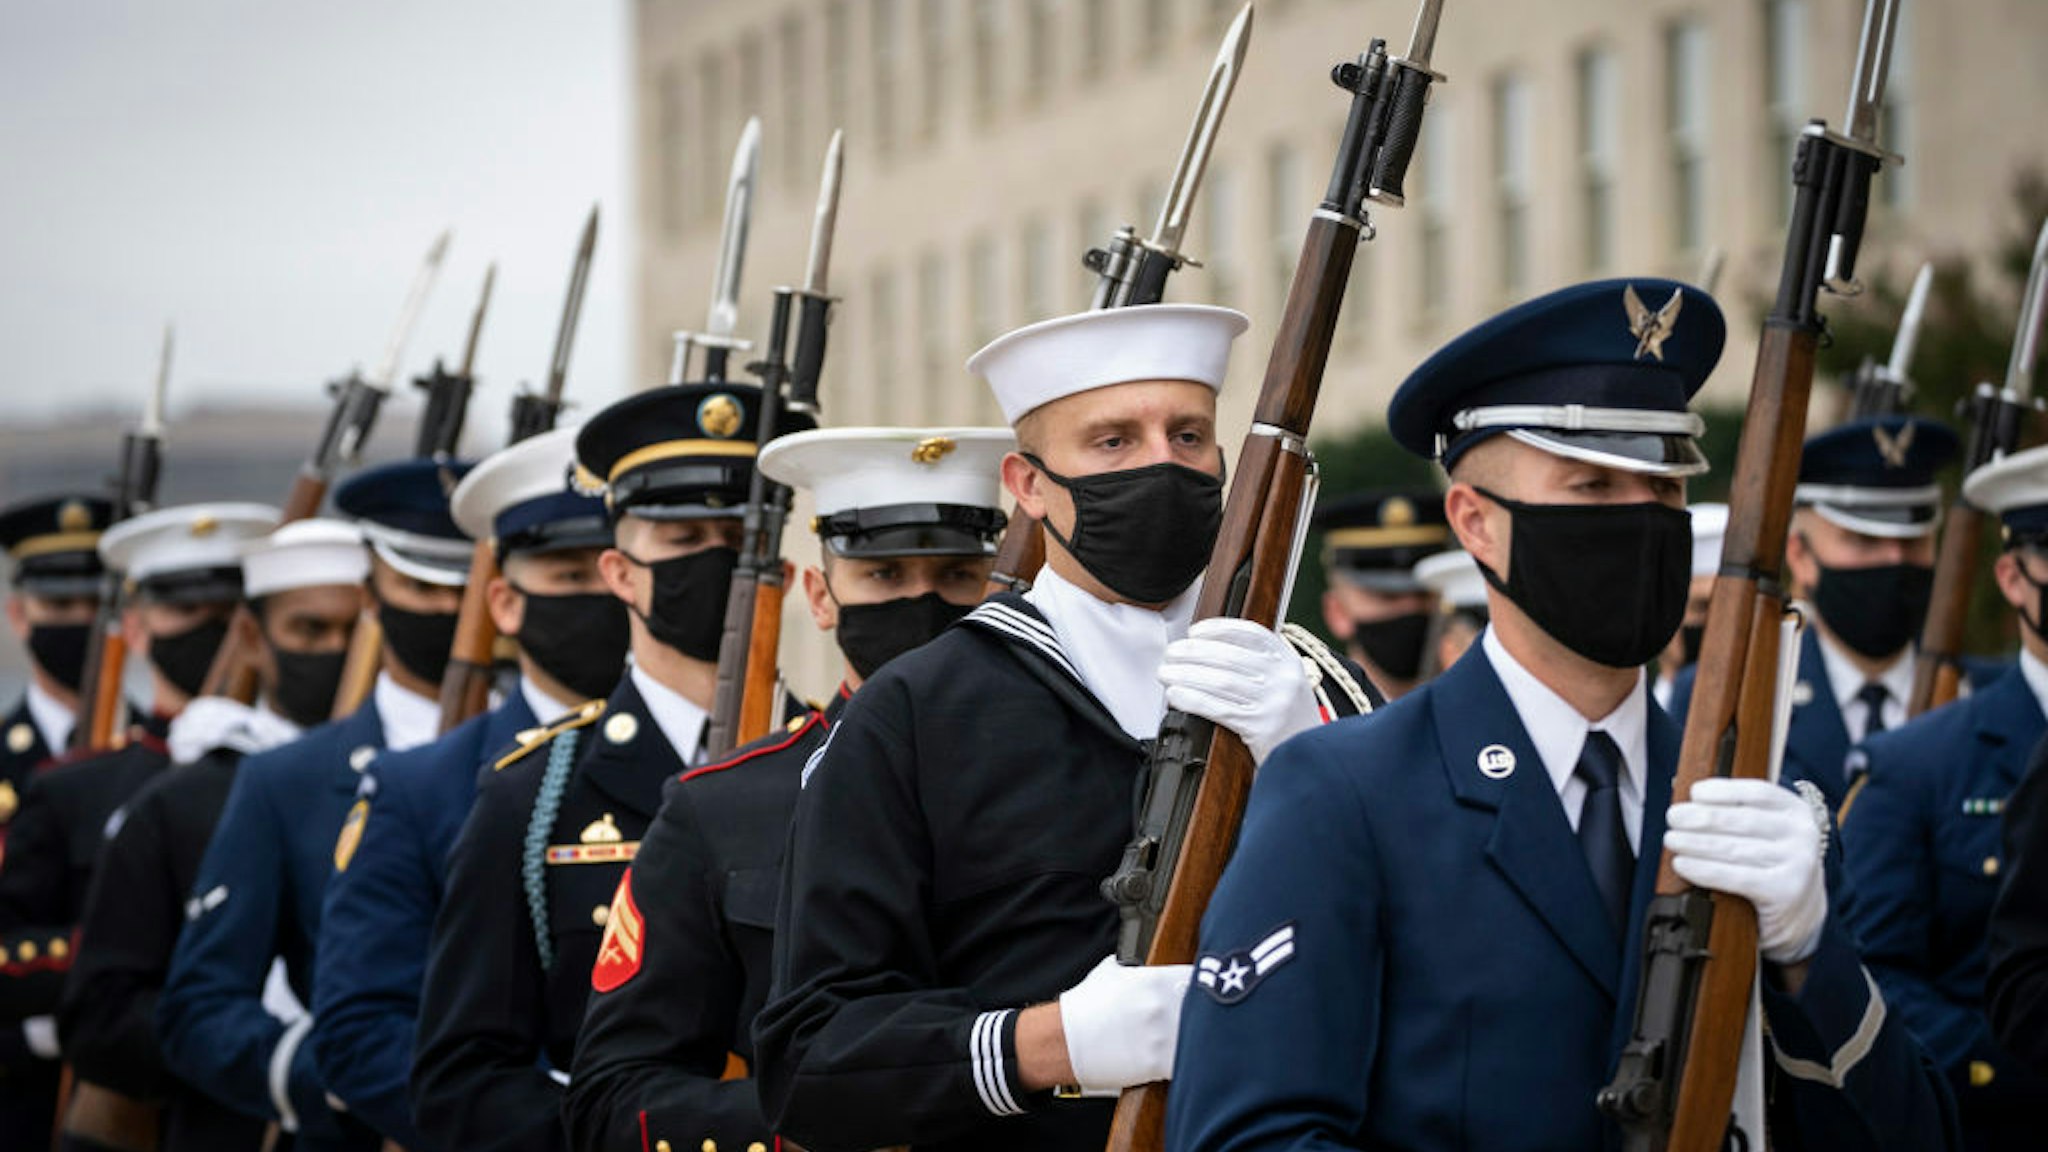 ARLINGTON, VA - OCTOBER 06: A military honor guard arrives for a welcome ceremony for Polish Defense Minister Mariusz Blaszczak at the Pentagon October 6, 2021 in Arlington, Virginia. Blaszczak has served as Polish Defense Minister since early 2018. (Photo by Drew Angerer/Getty Images)